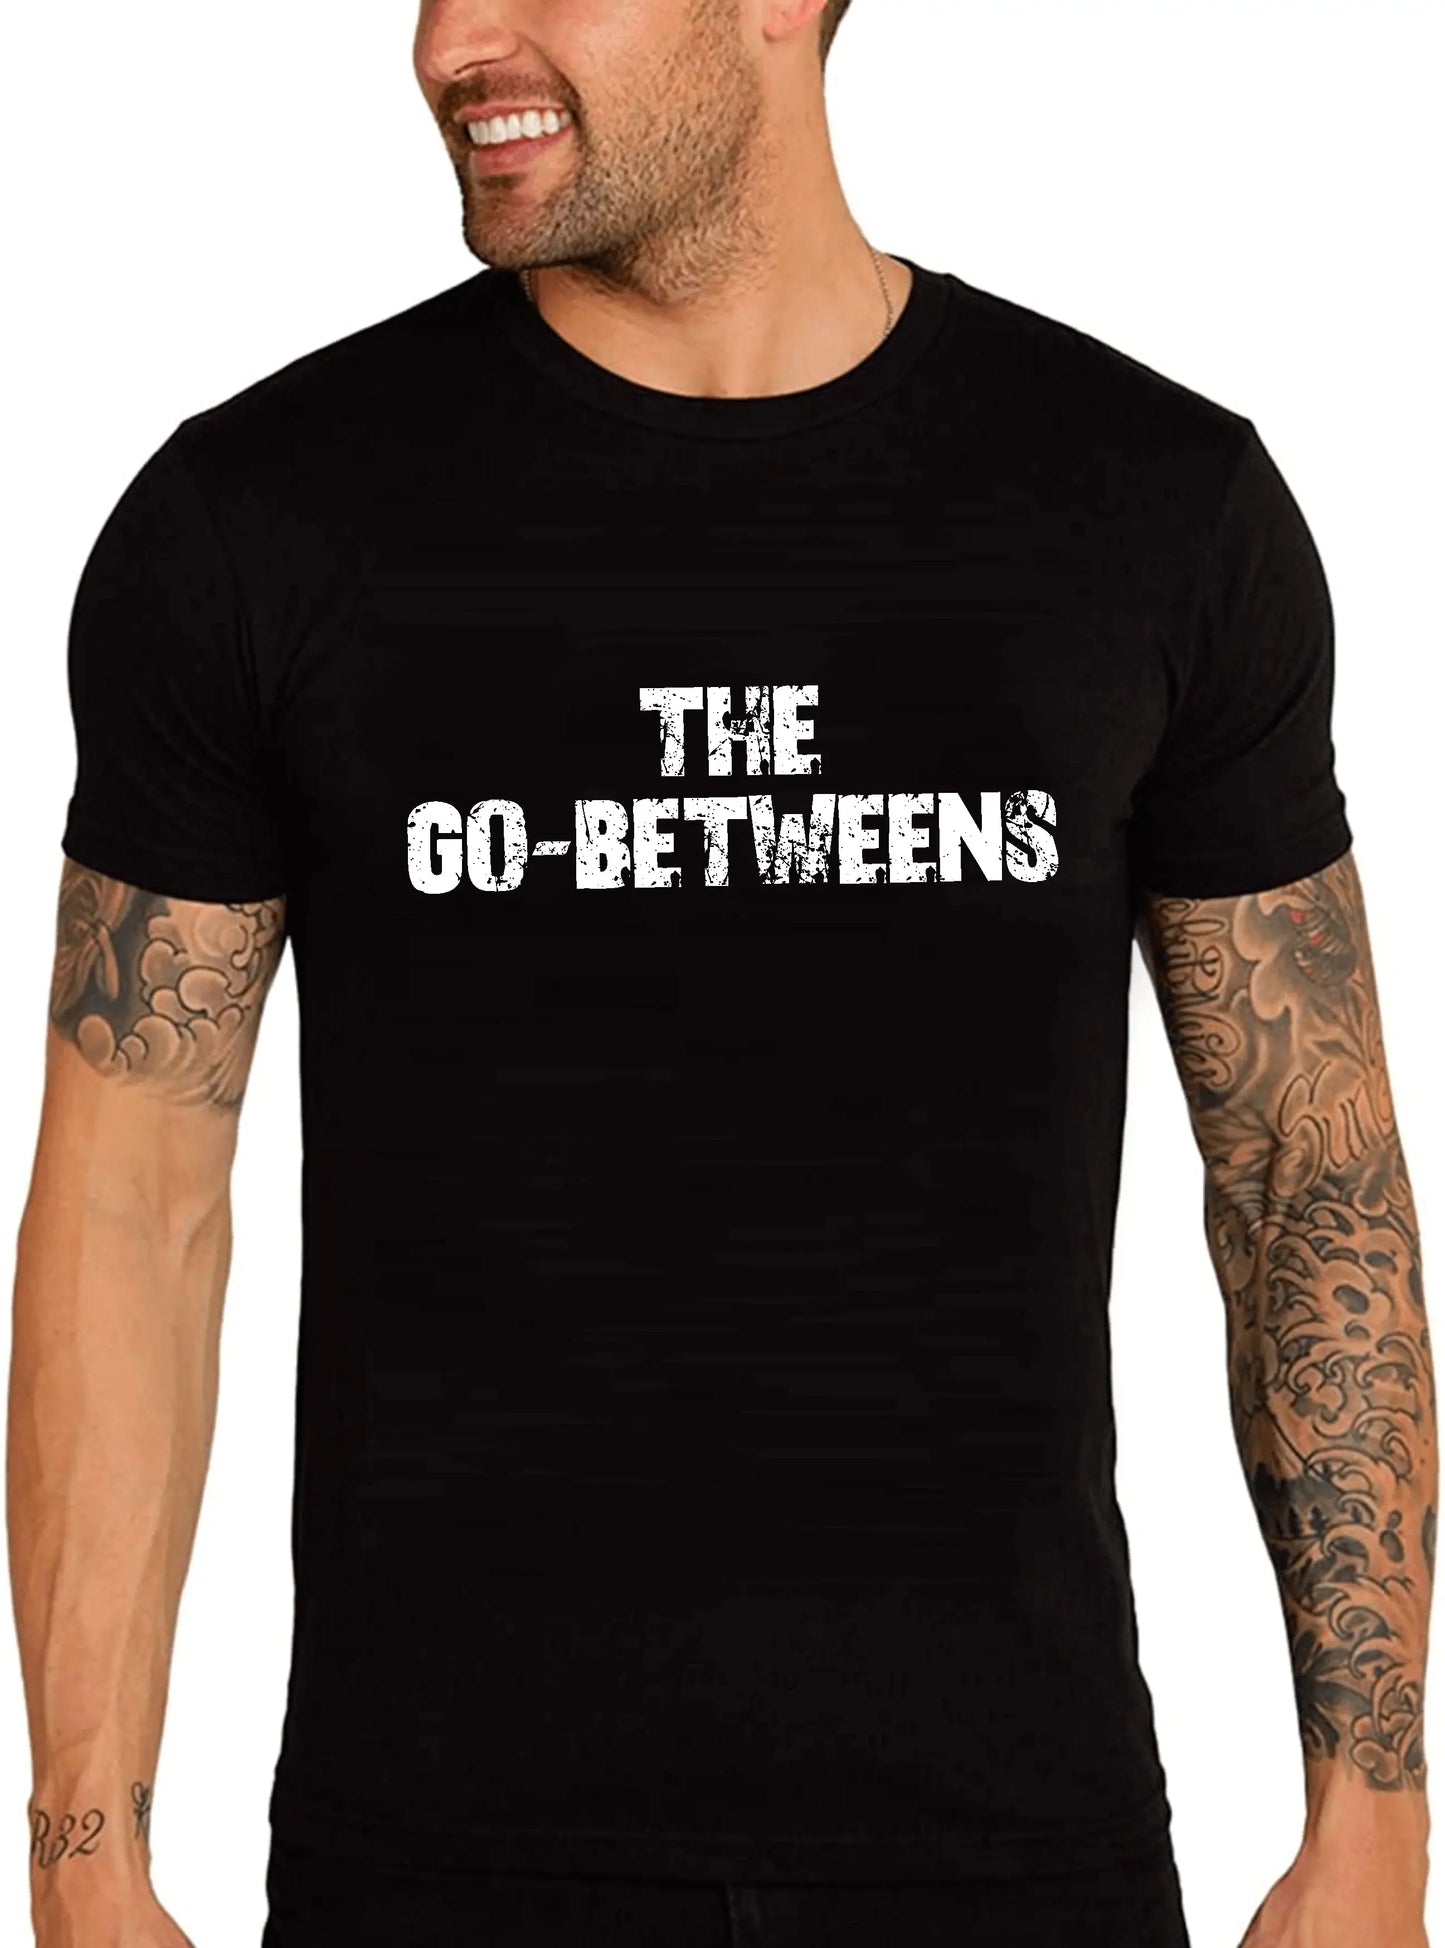 Men's Graphic T-Shirt The Gobetweens Eco-Friendly Limited Edition Short Sleeve Tee-Shirt Vintage Birthday Gift Novelty